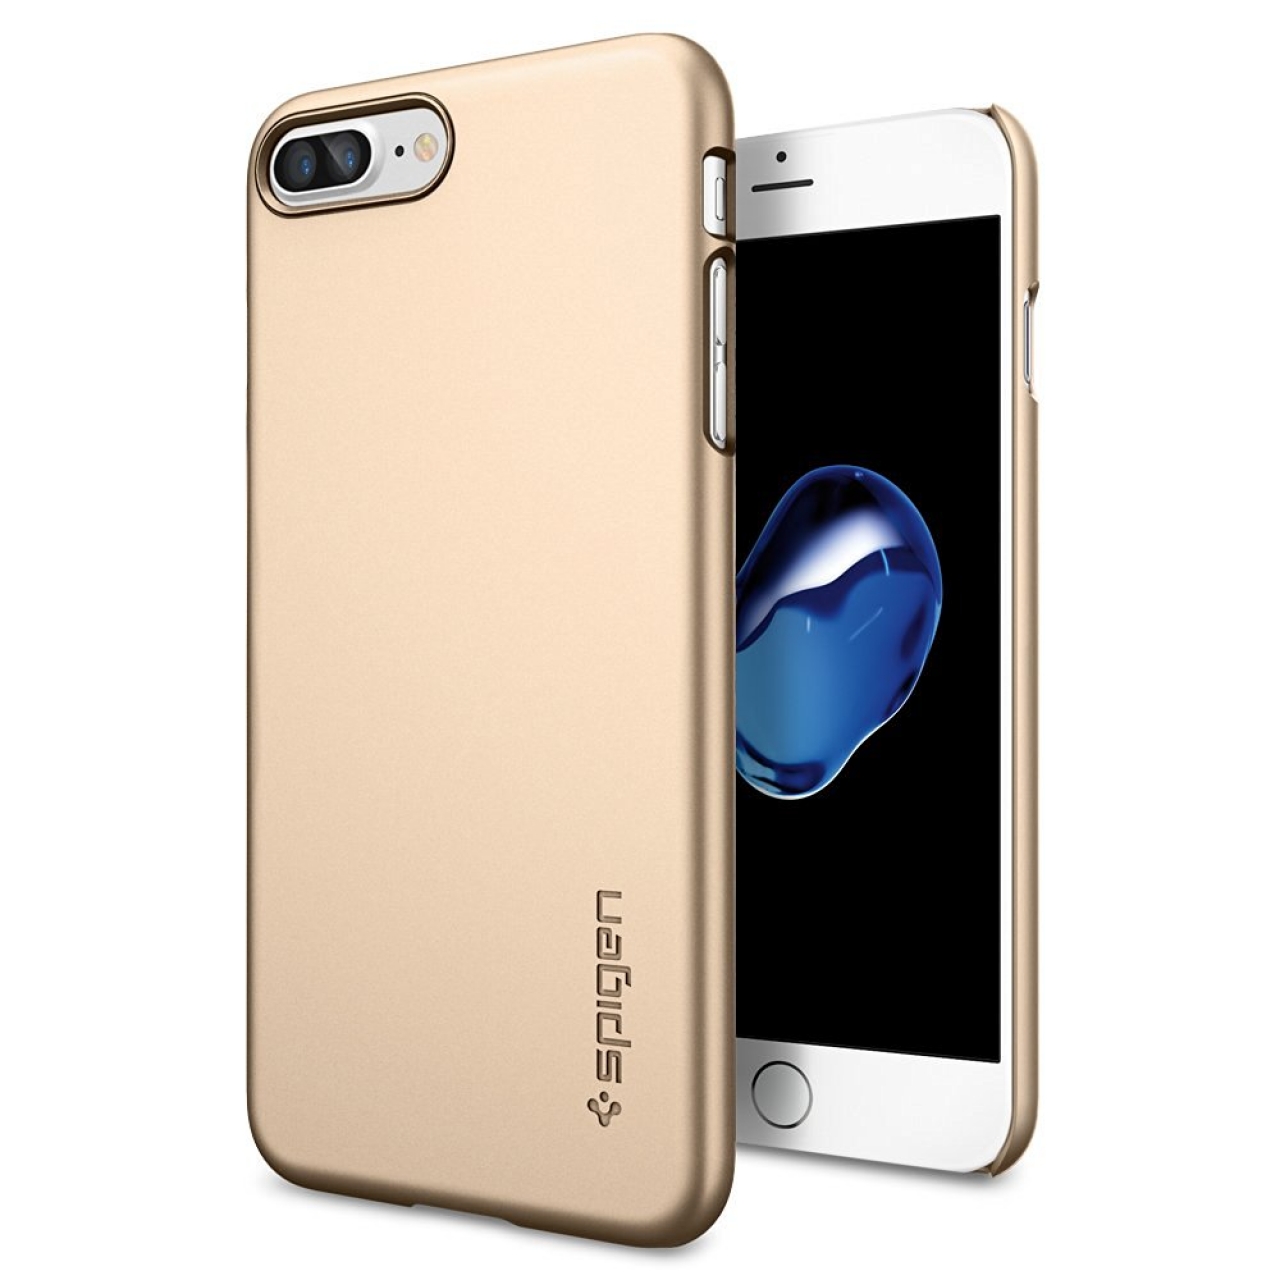 Spigen Thin Fit Case iPhone 7 (Champagne Gold) - iClarified